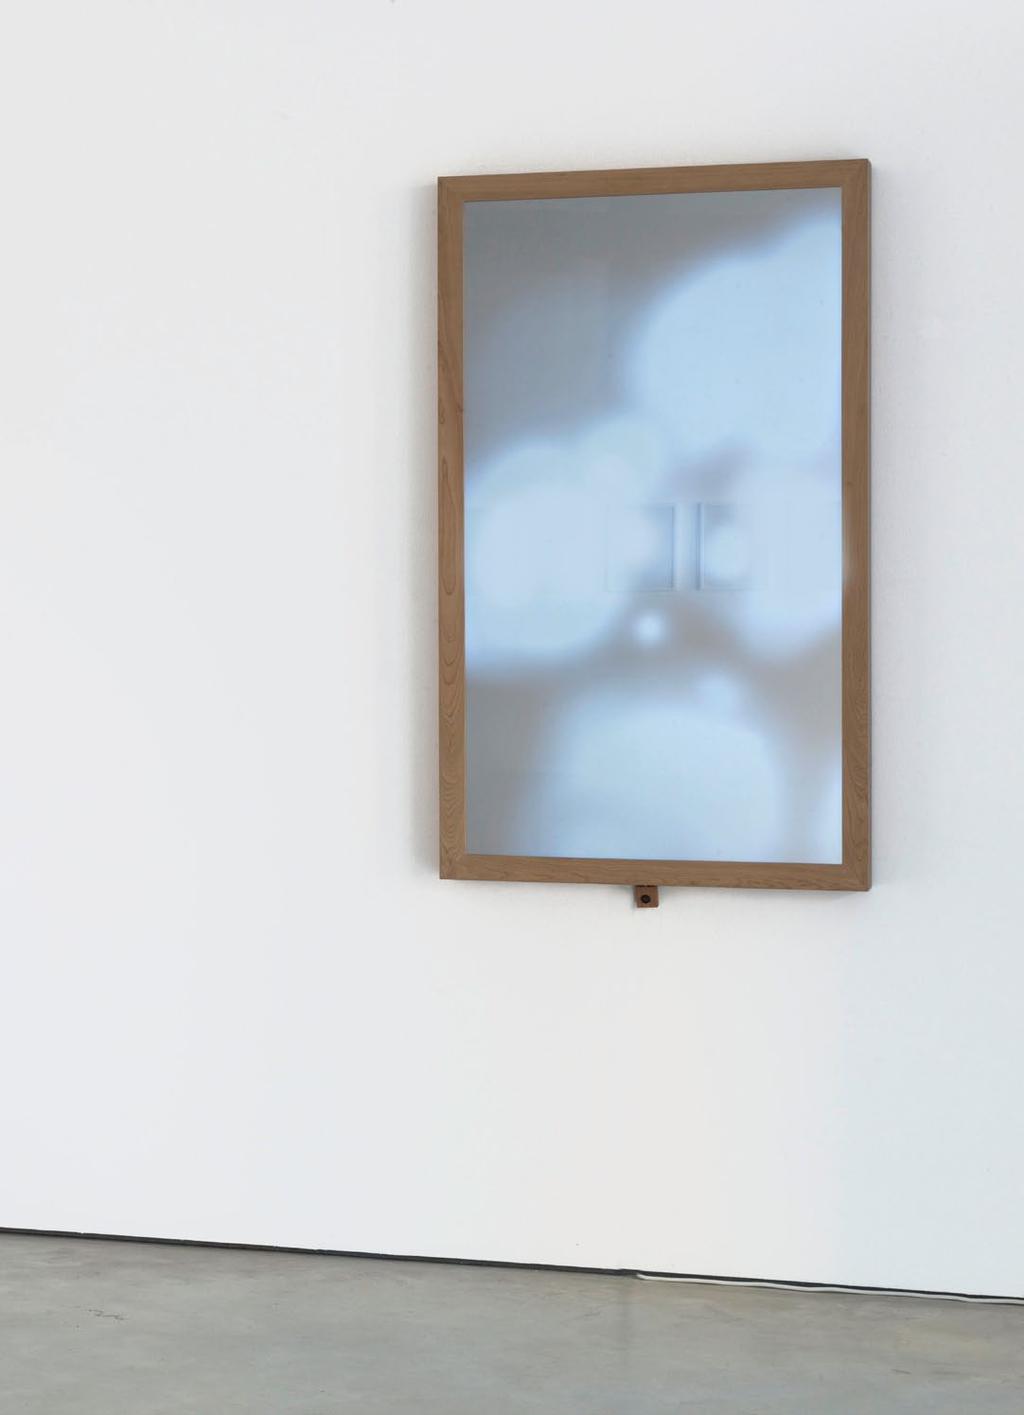 Transient Shade, 2014 Liquid cristal display, sensor, glass, mirror film, cherry wood 140 x 83 x 10cm Transient Shade seems to be a normal mirror but in fact is an apparatus that reacts with the